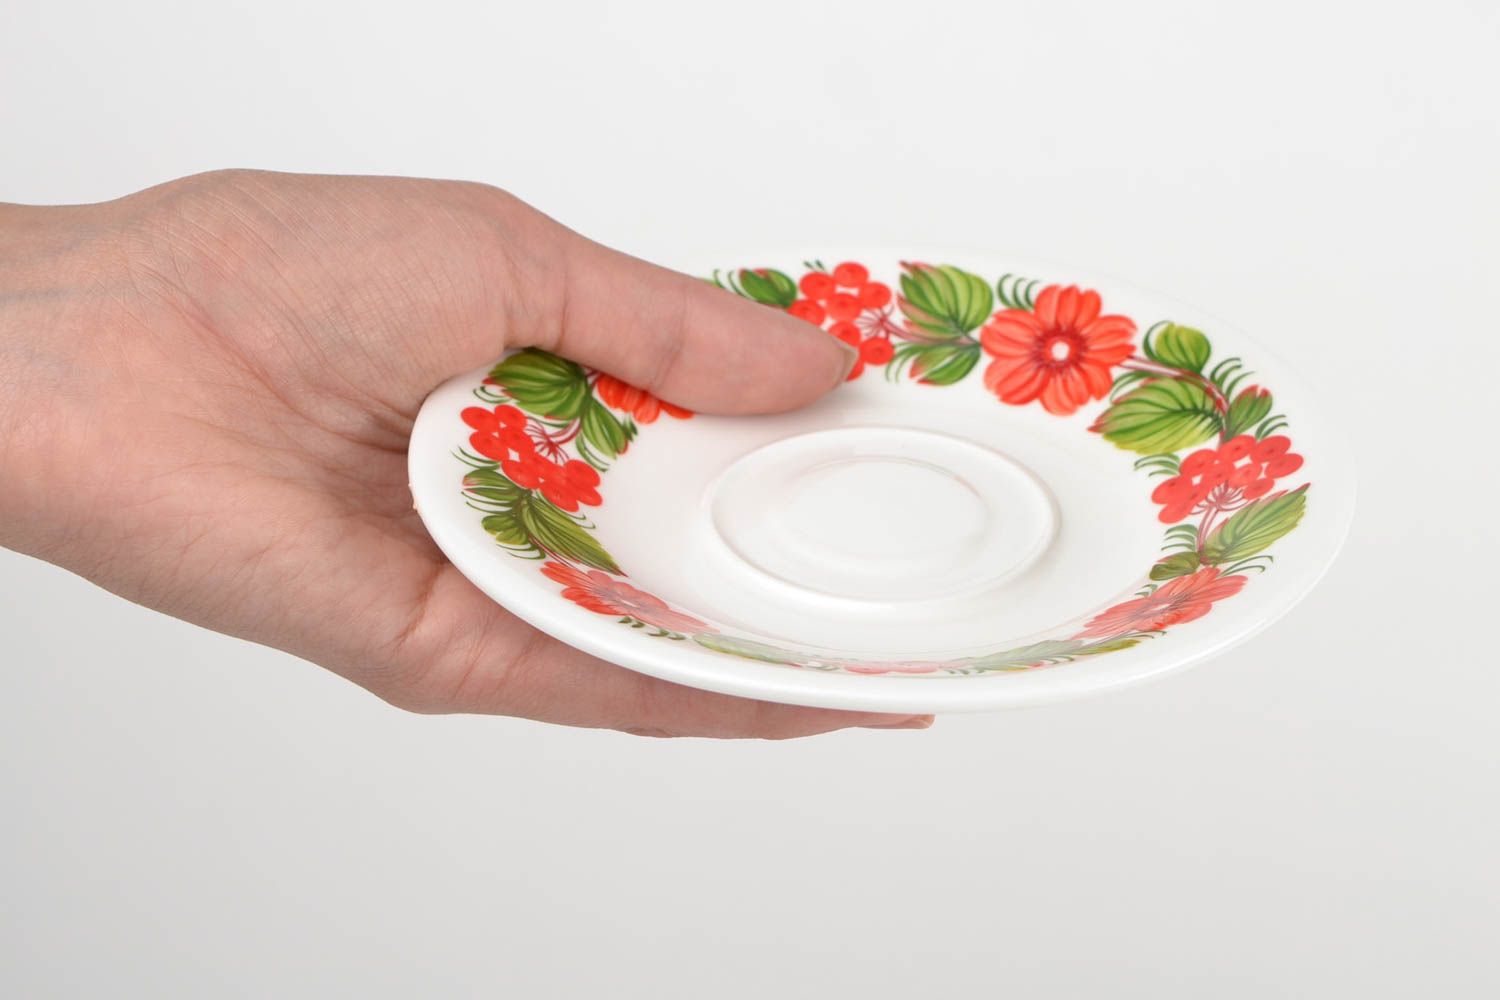 Handmade saucer porcelain saucer painted dishes festive table decoration photo 2